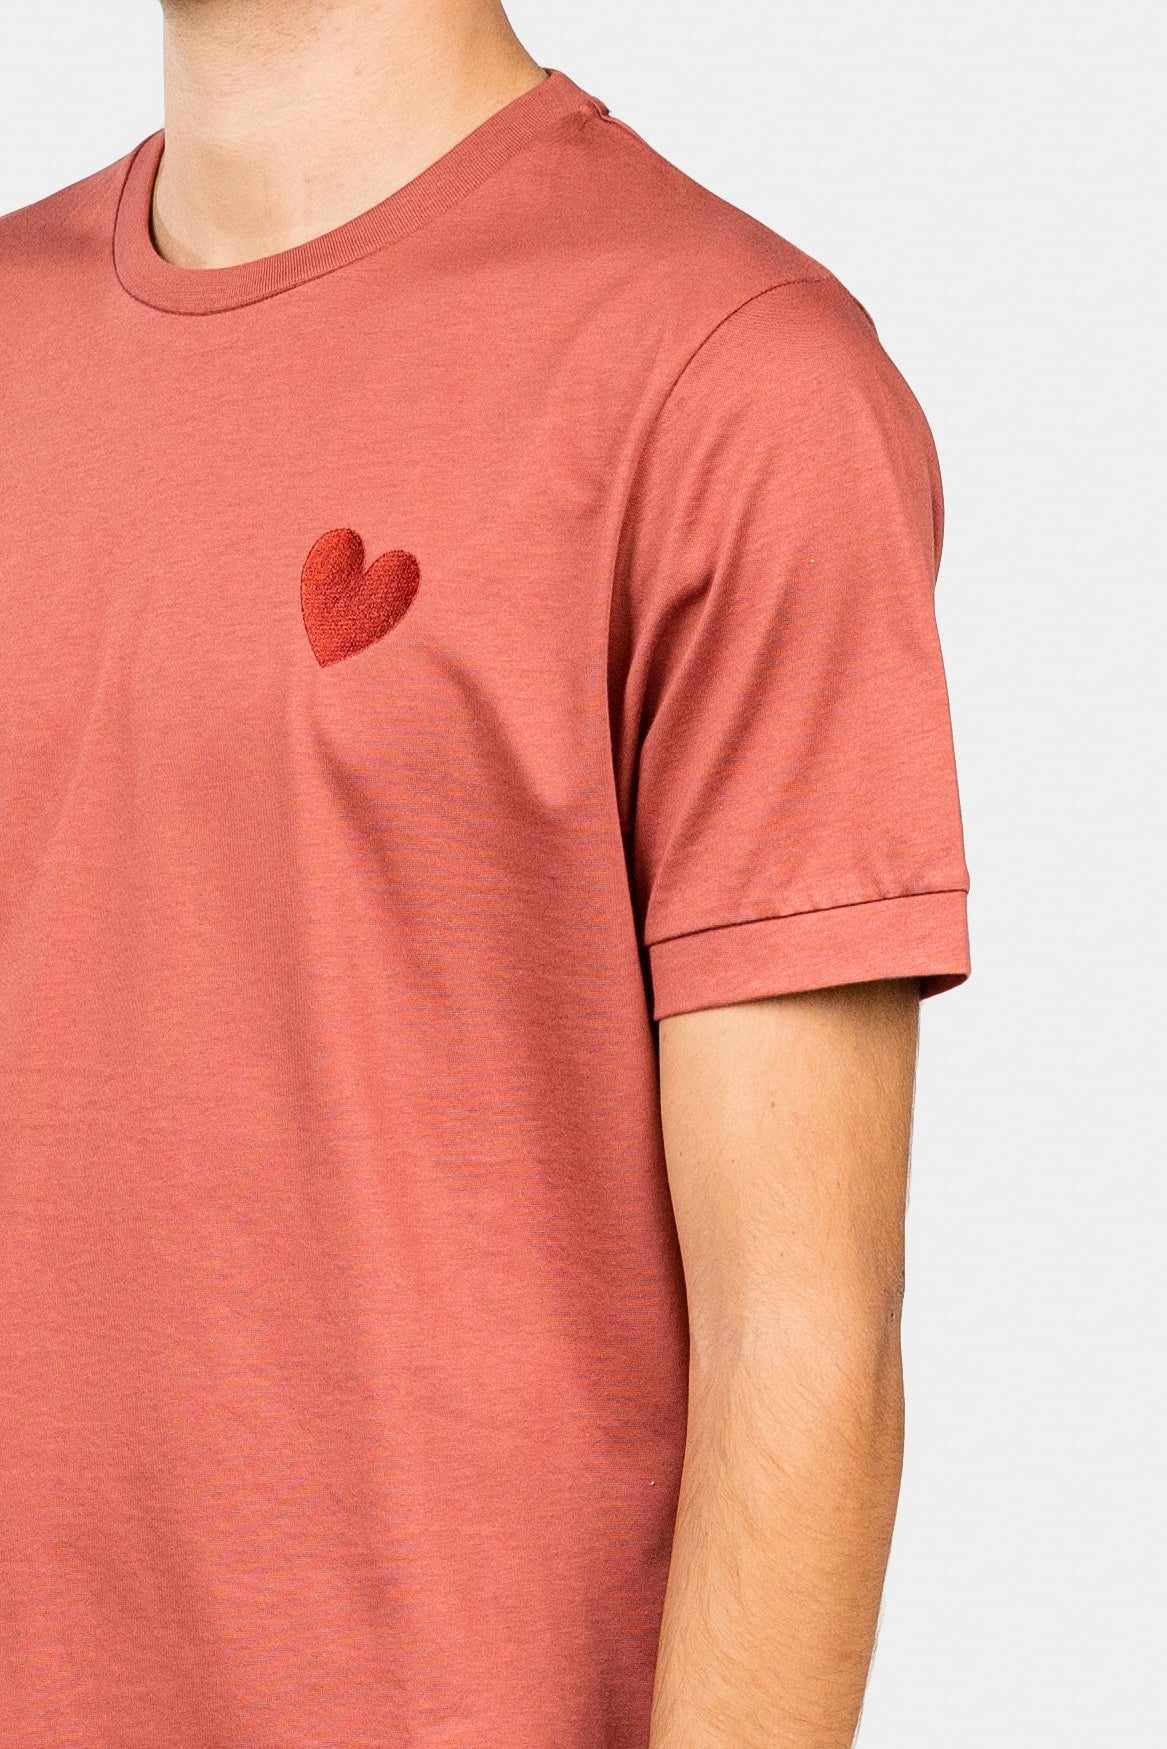 Classic Embroidery Heart Red Ochre T-shirt